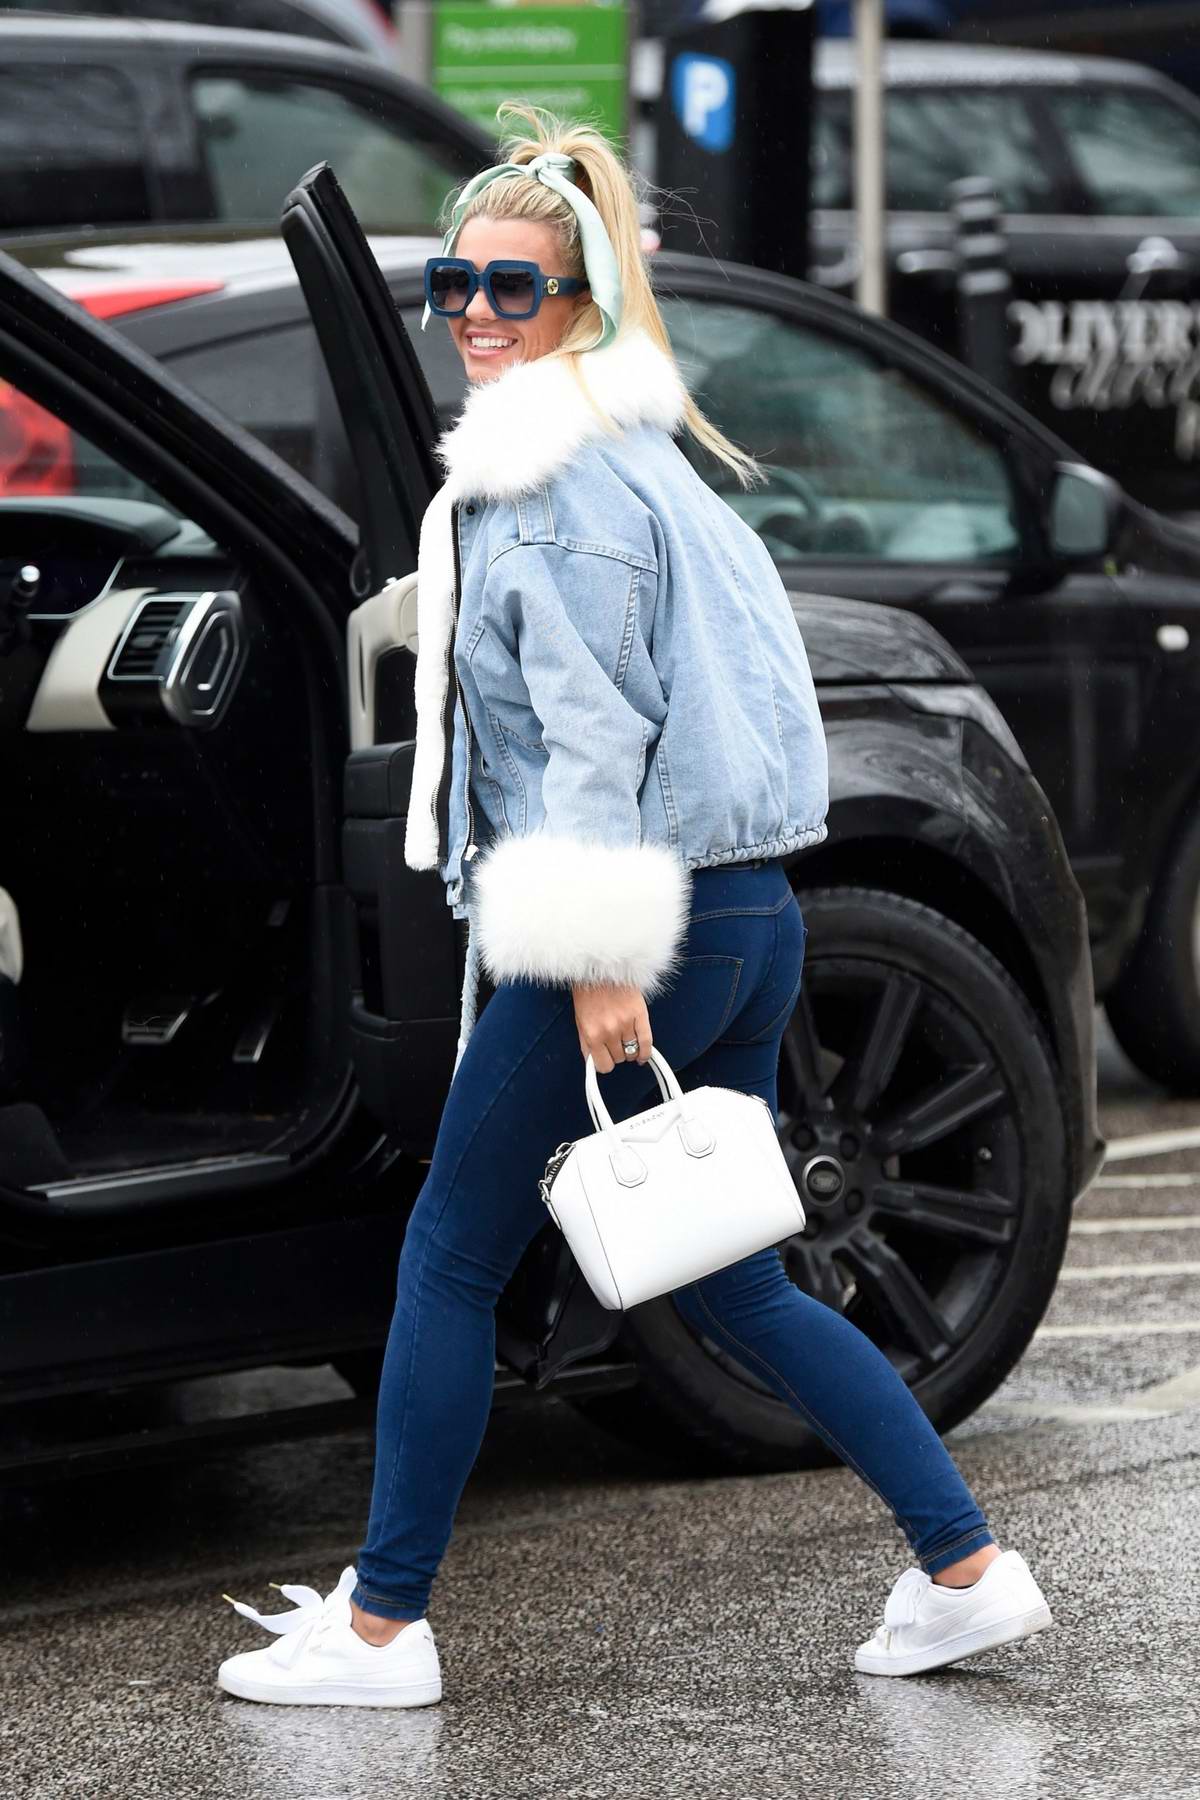 christine mcguinness seen wearing a fur-lined denim jacket and